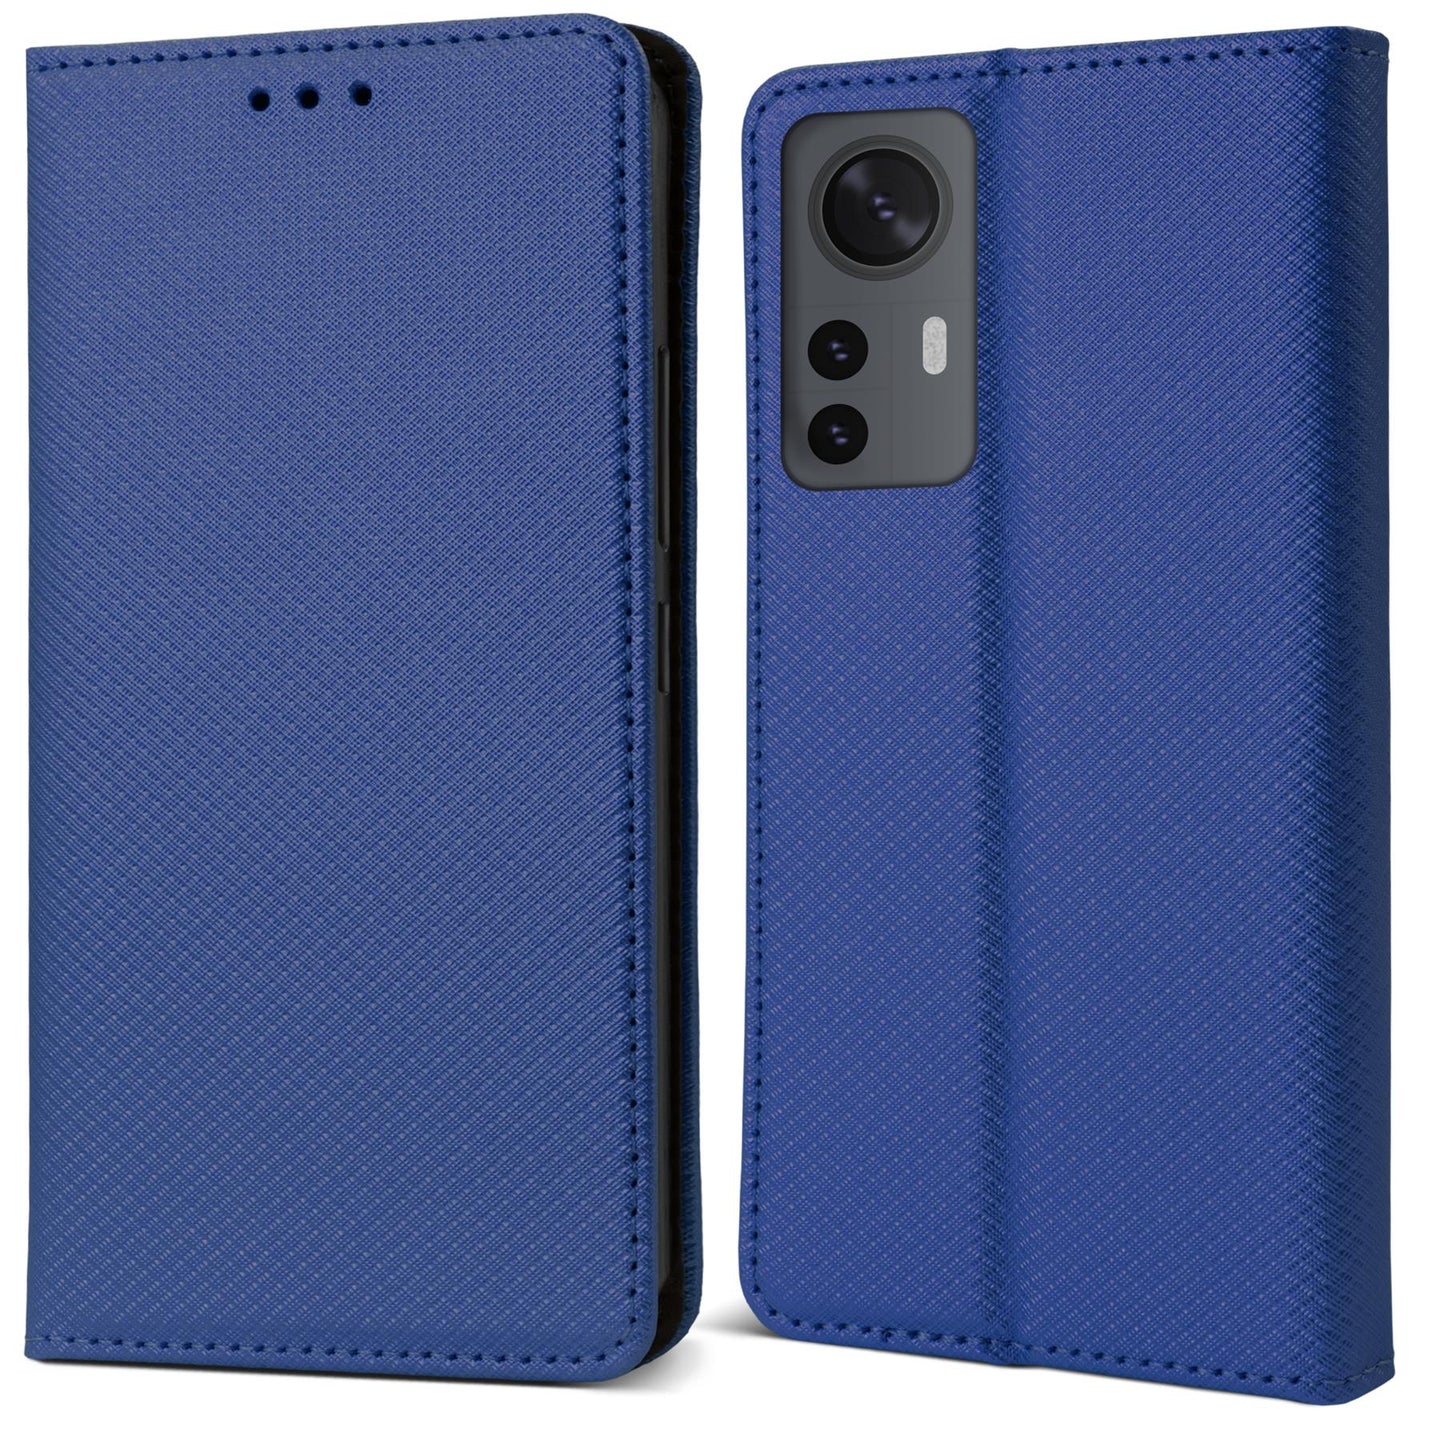 Moozy Case Flip Cover for Xiaomi 12 and Xiaomi 12X, Dark Blue - Smart Magnetic Flip Case Flip Folio Wallet Case with Card Holder and Stand, Credit Card Slots, Kickstand Function